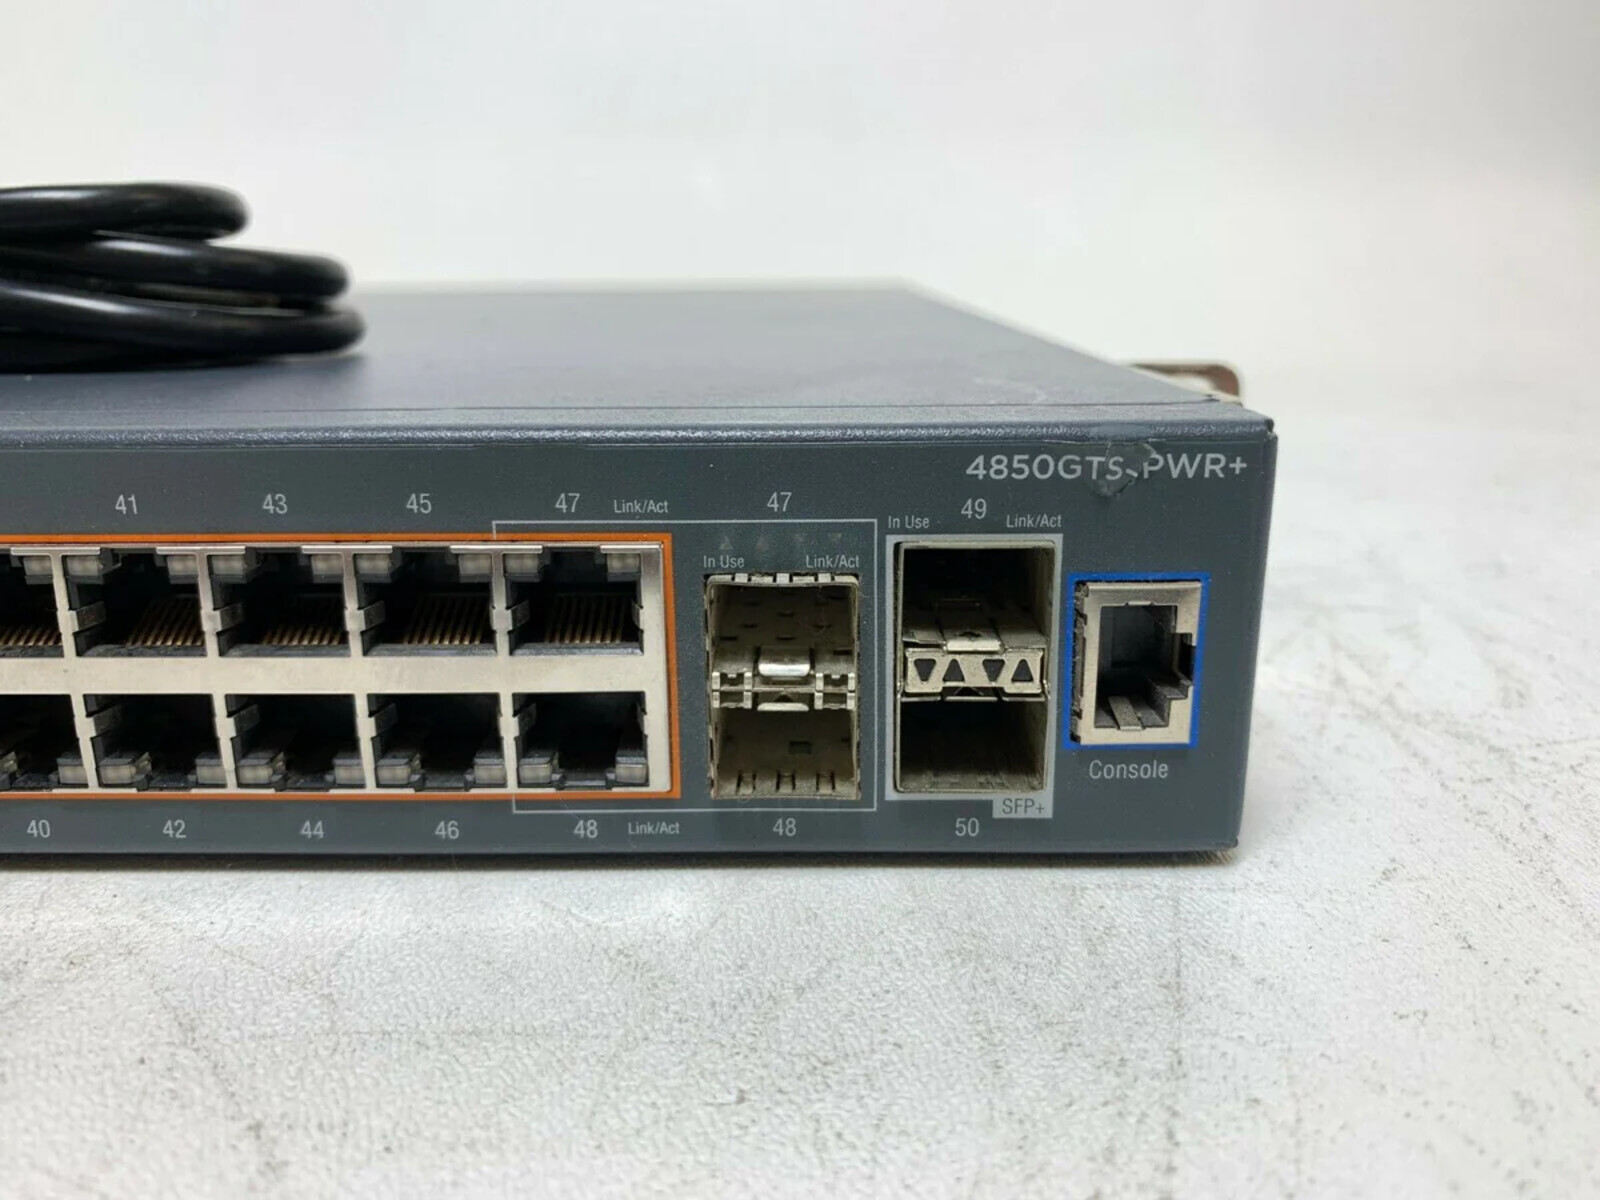 How To Commission Your Avaya Titan 4850GTS-PWR+ Network Switch Using PuTTY